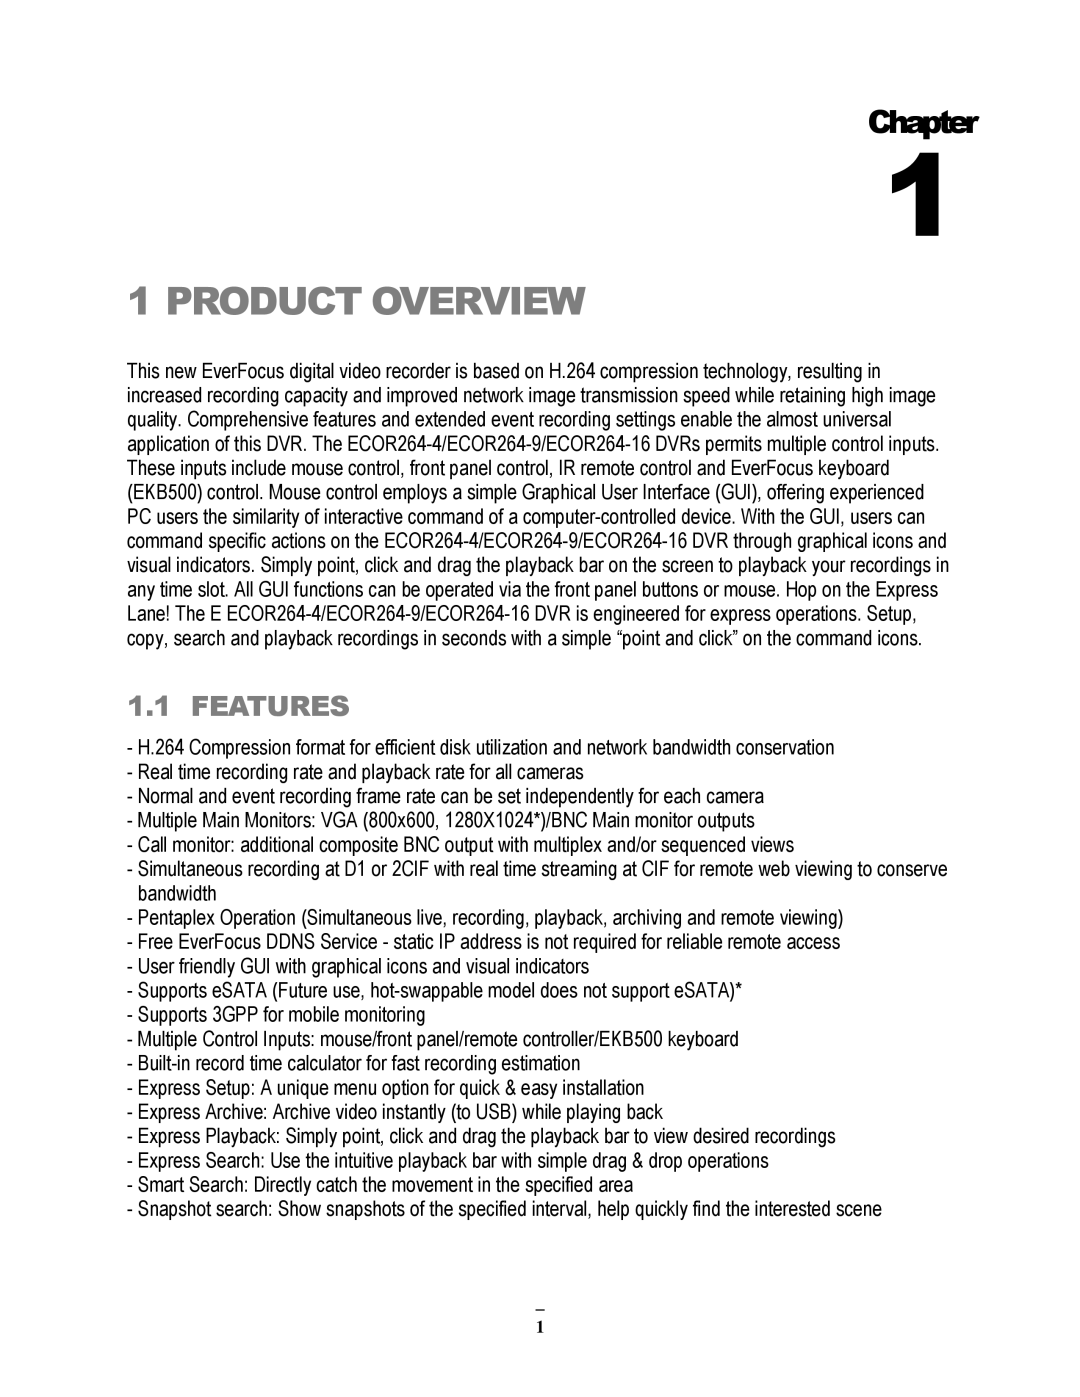 EverFocus ECOR264-9X1, ECOR264-4X1, ECOR264-16X1 user manual Product Overview, Features 